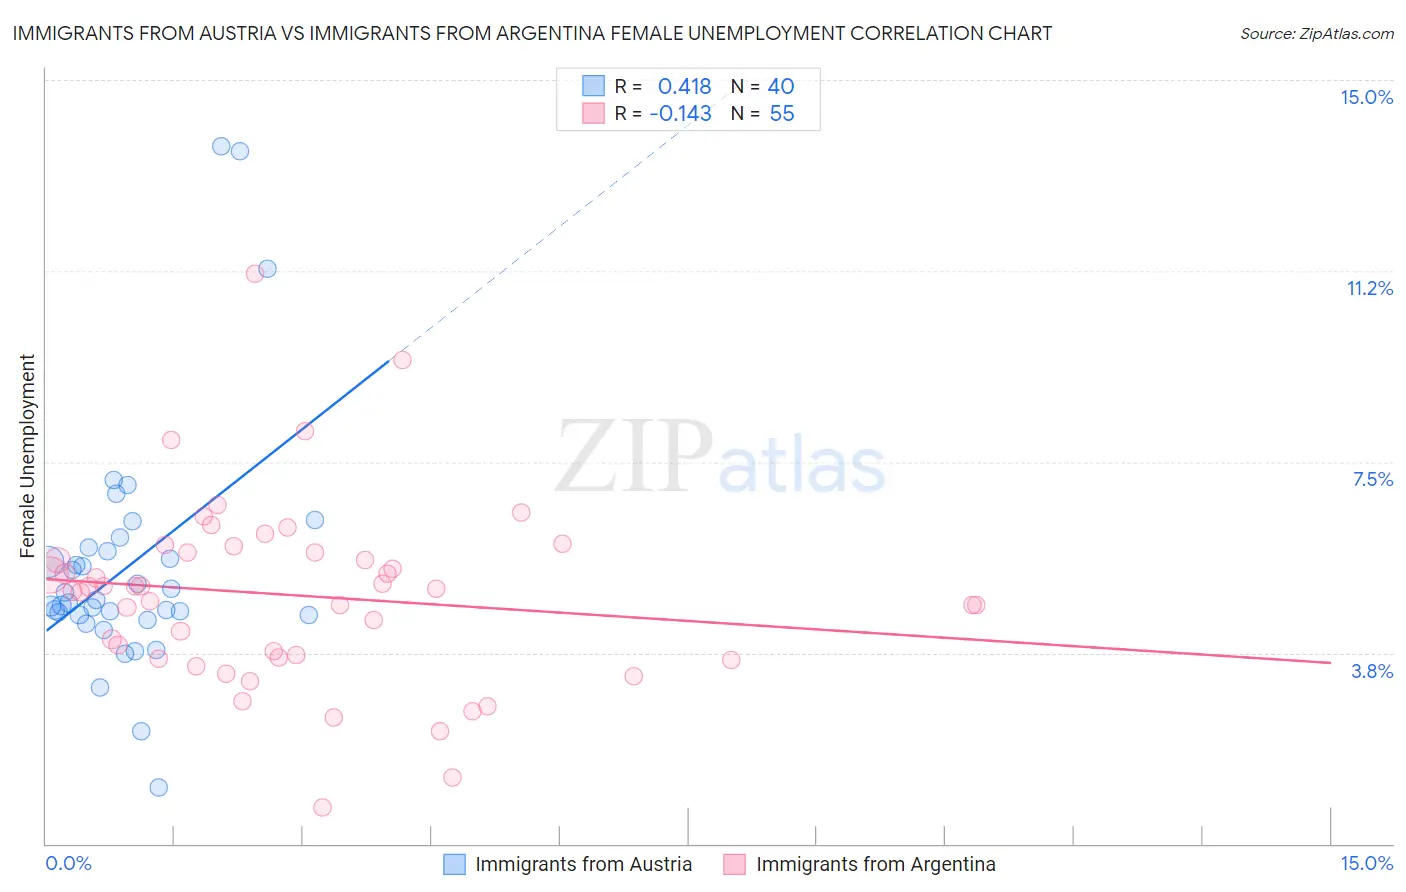 Immigrants from Austria vs Immigrants from Argentina Female Unemployment